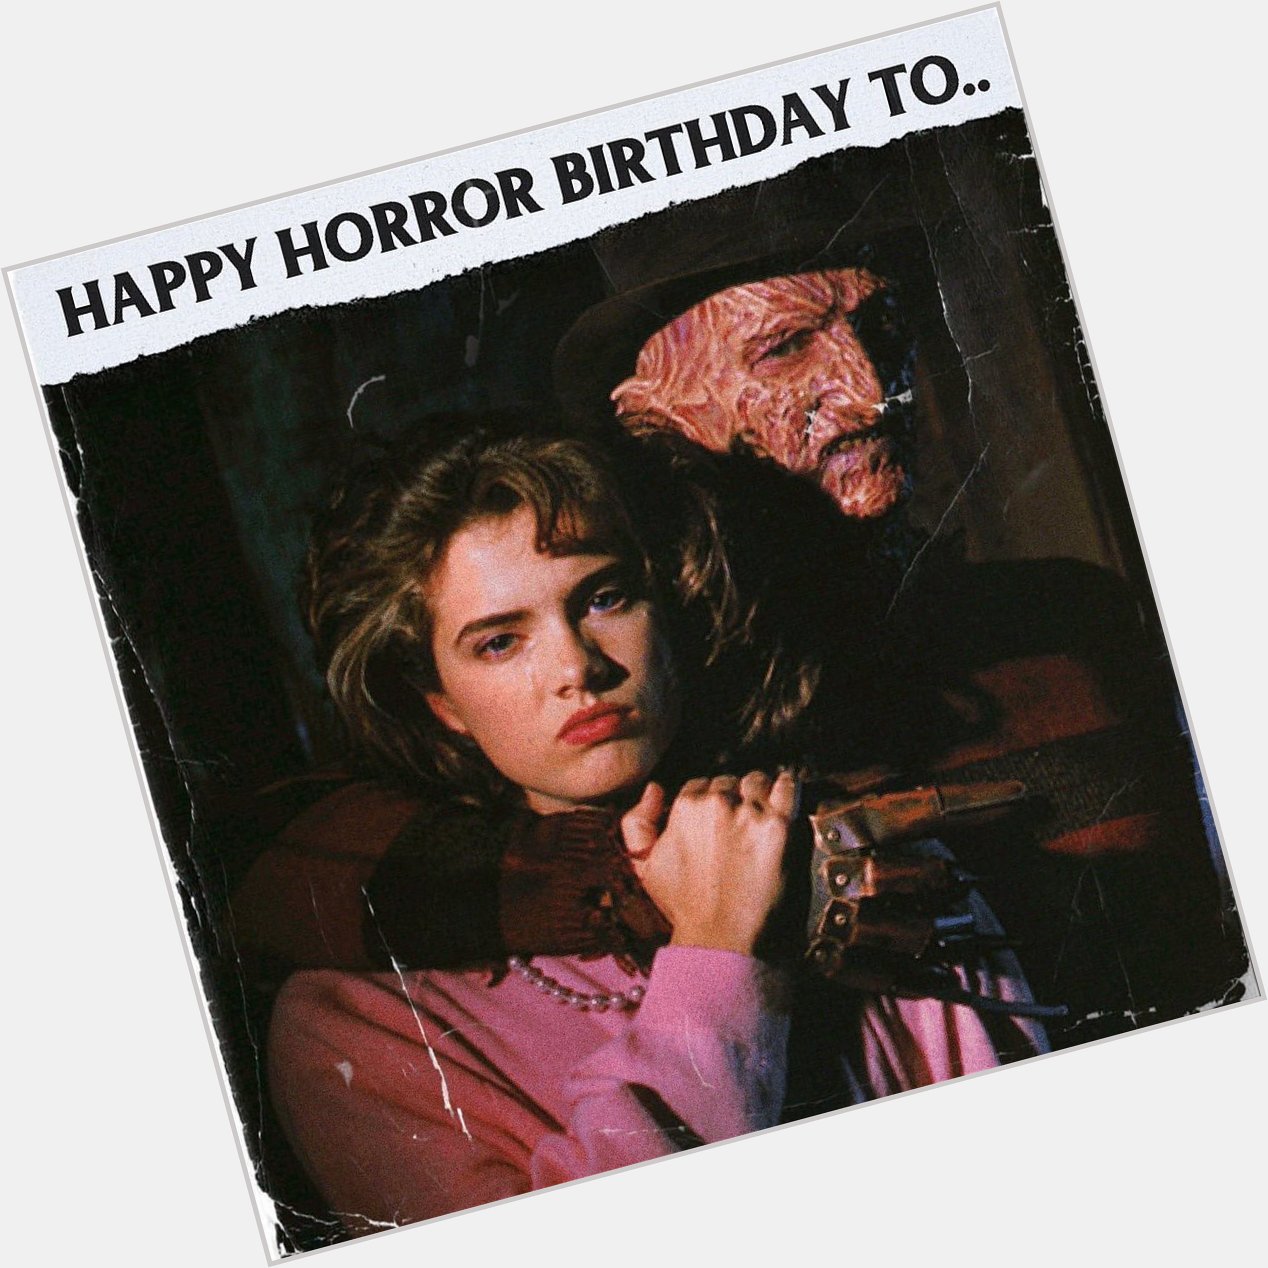 Happy Horror Birthday to the final girl of our dreams.. HEATHER LANGENKAMP - born in 1964! 